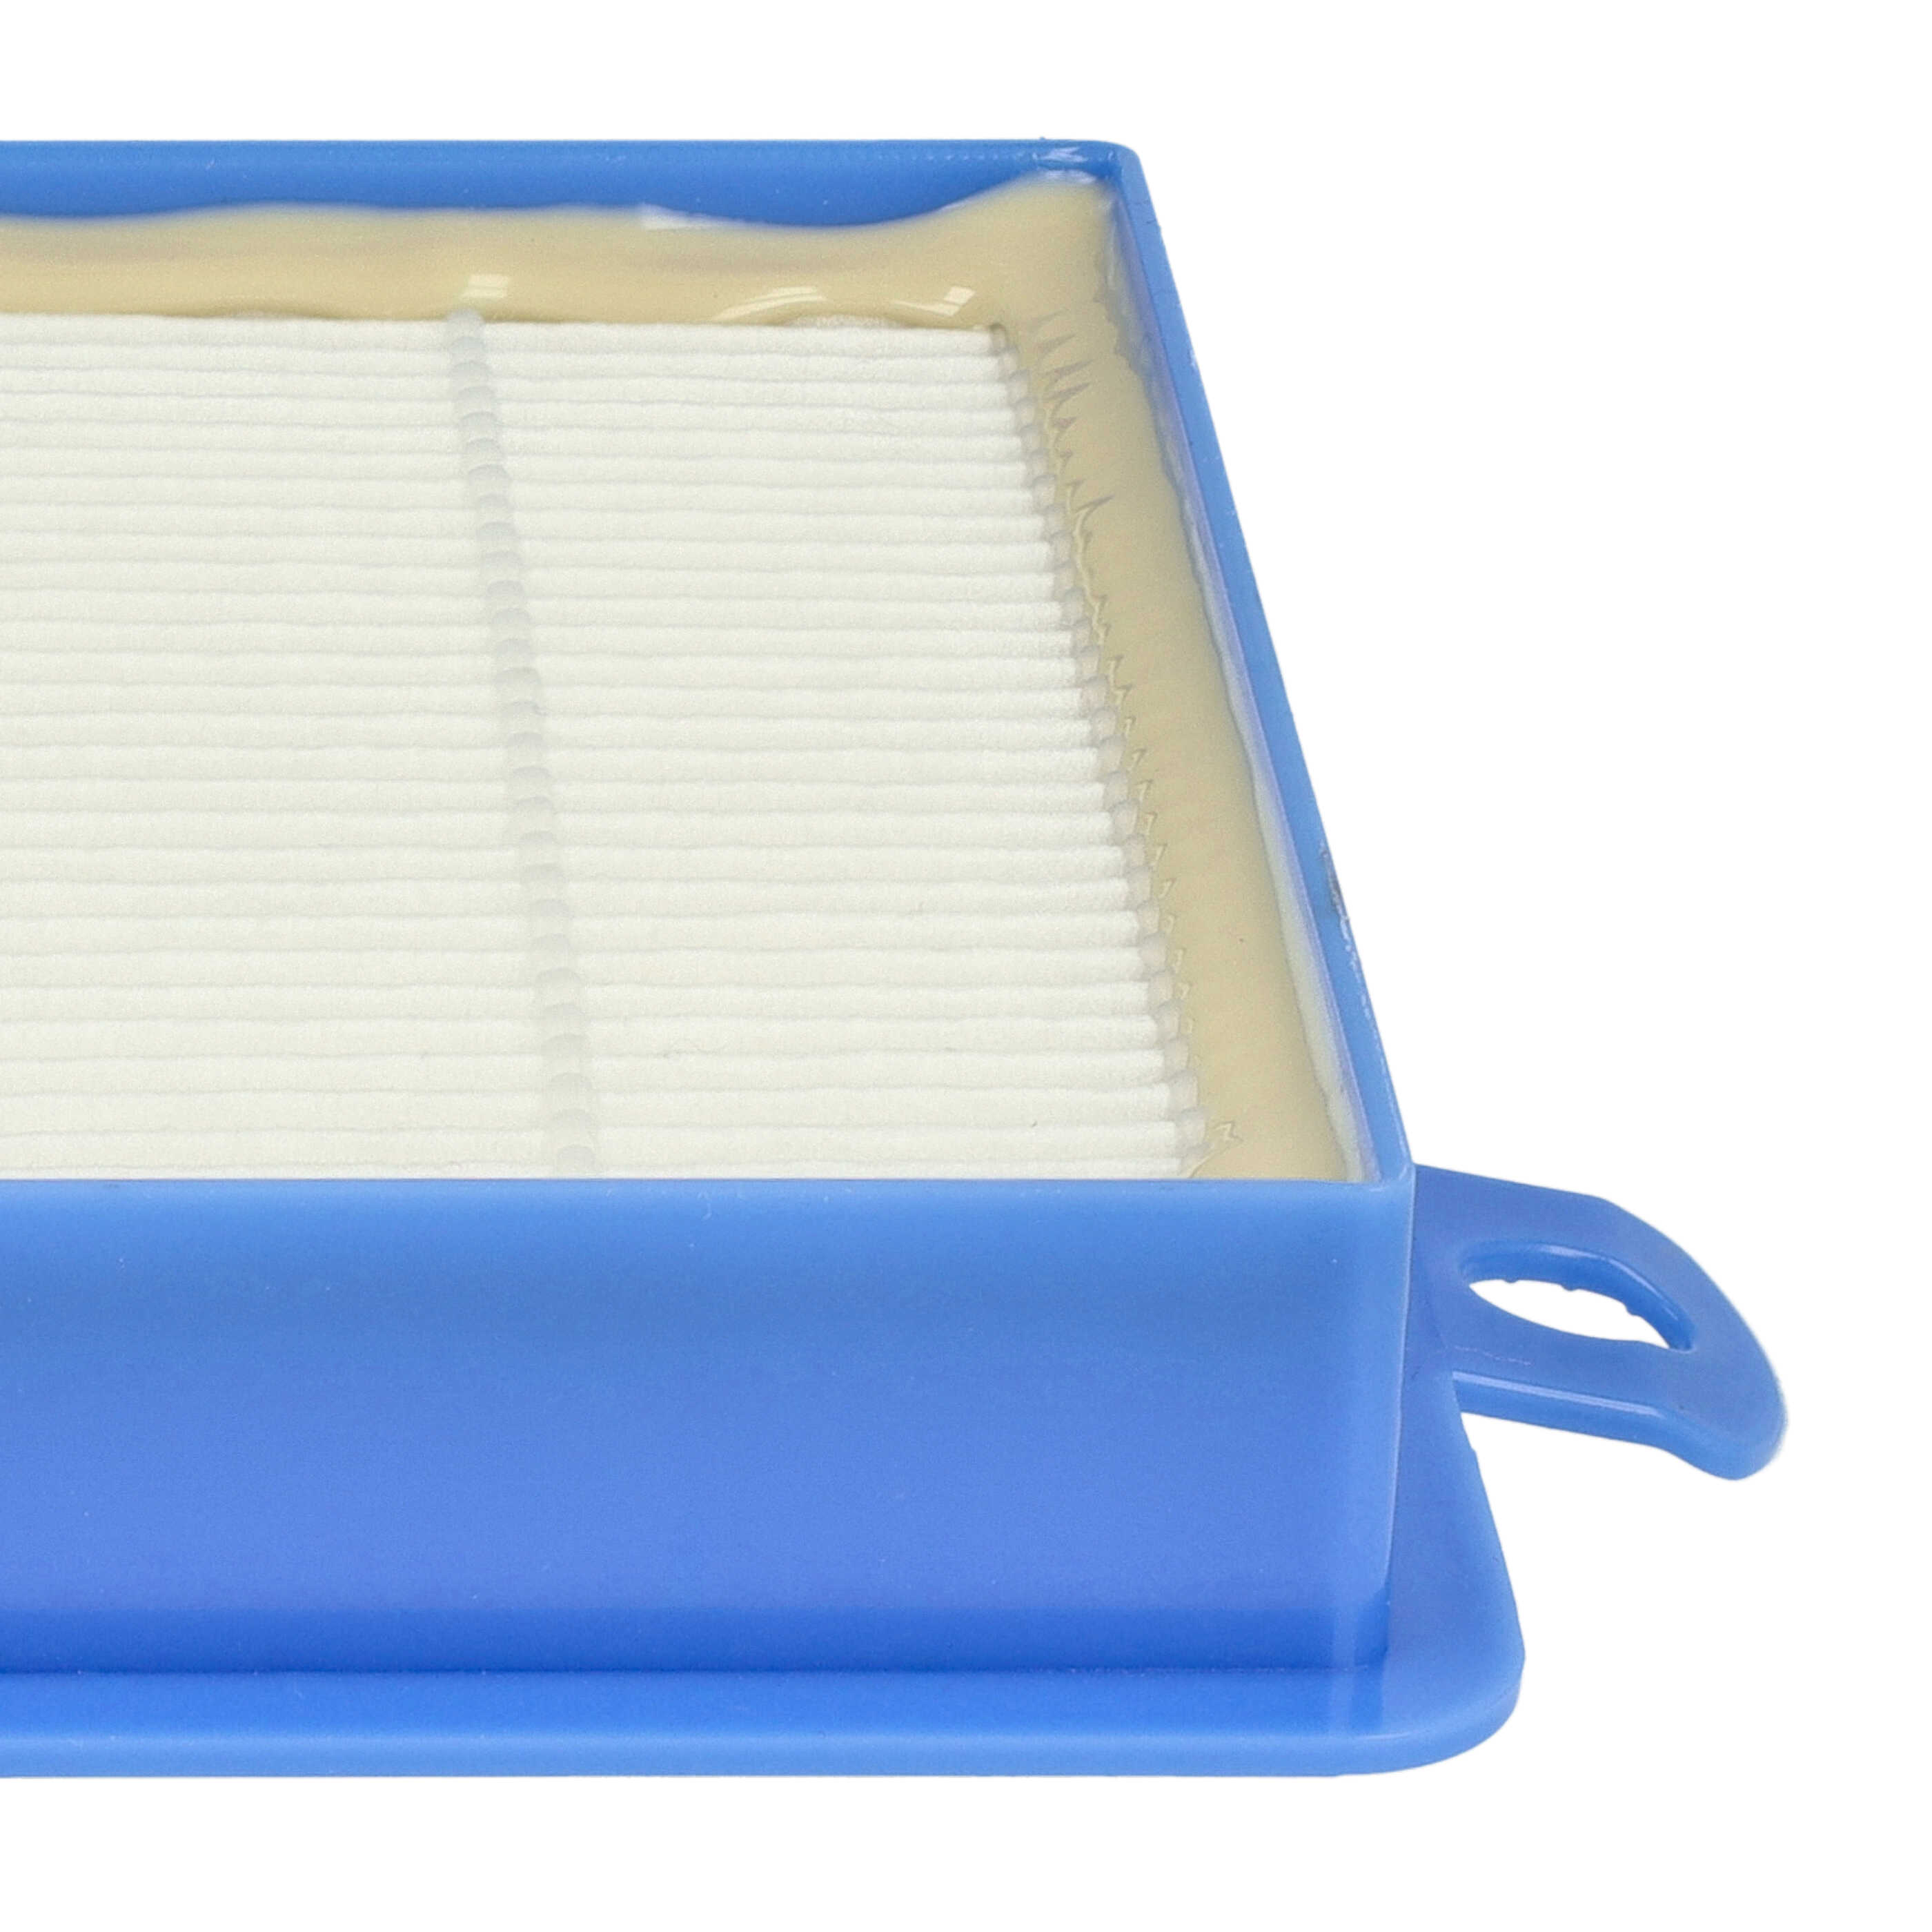 3x HEPA filter replaces AEF13W, H13, AEF 13 W for PhilipsVacuum Cleaner